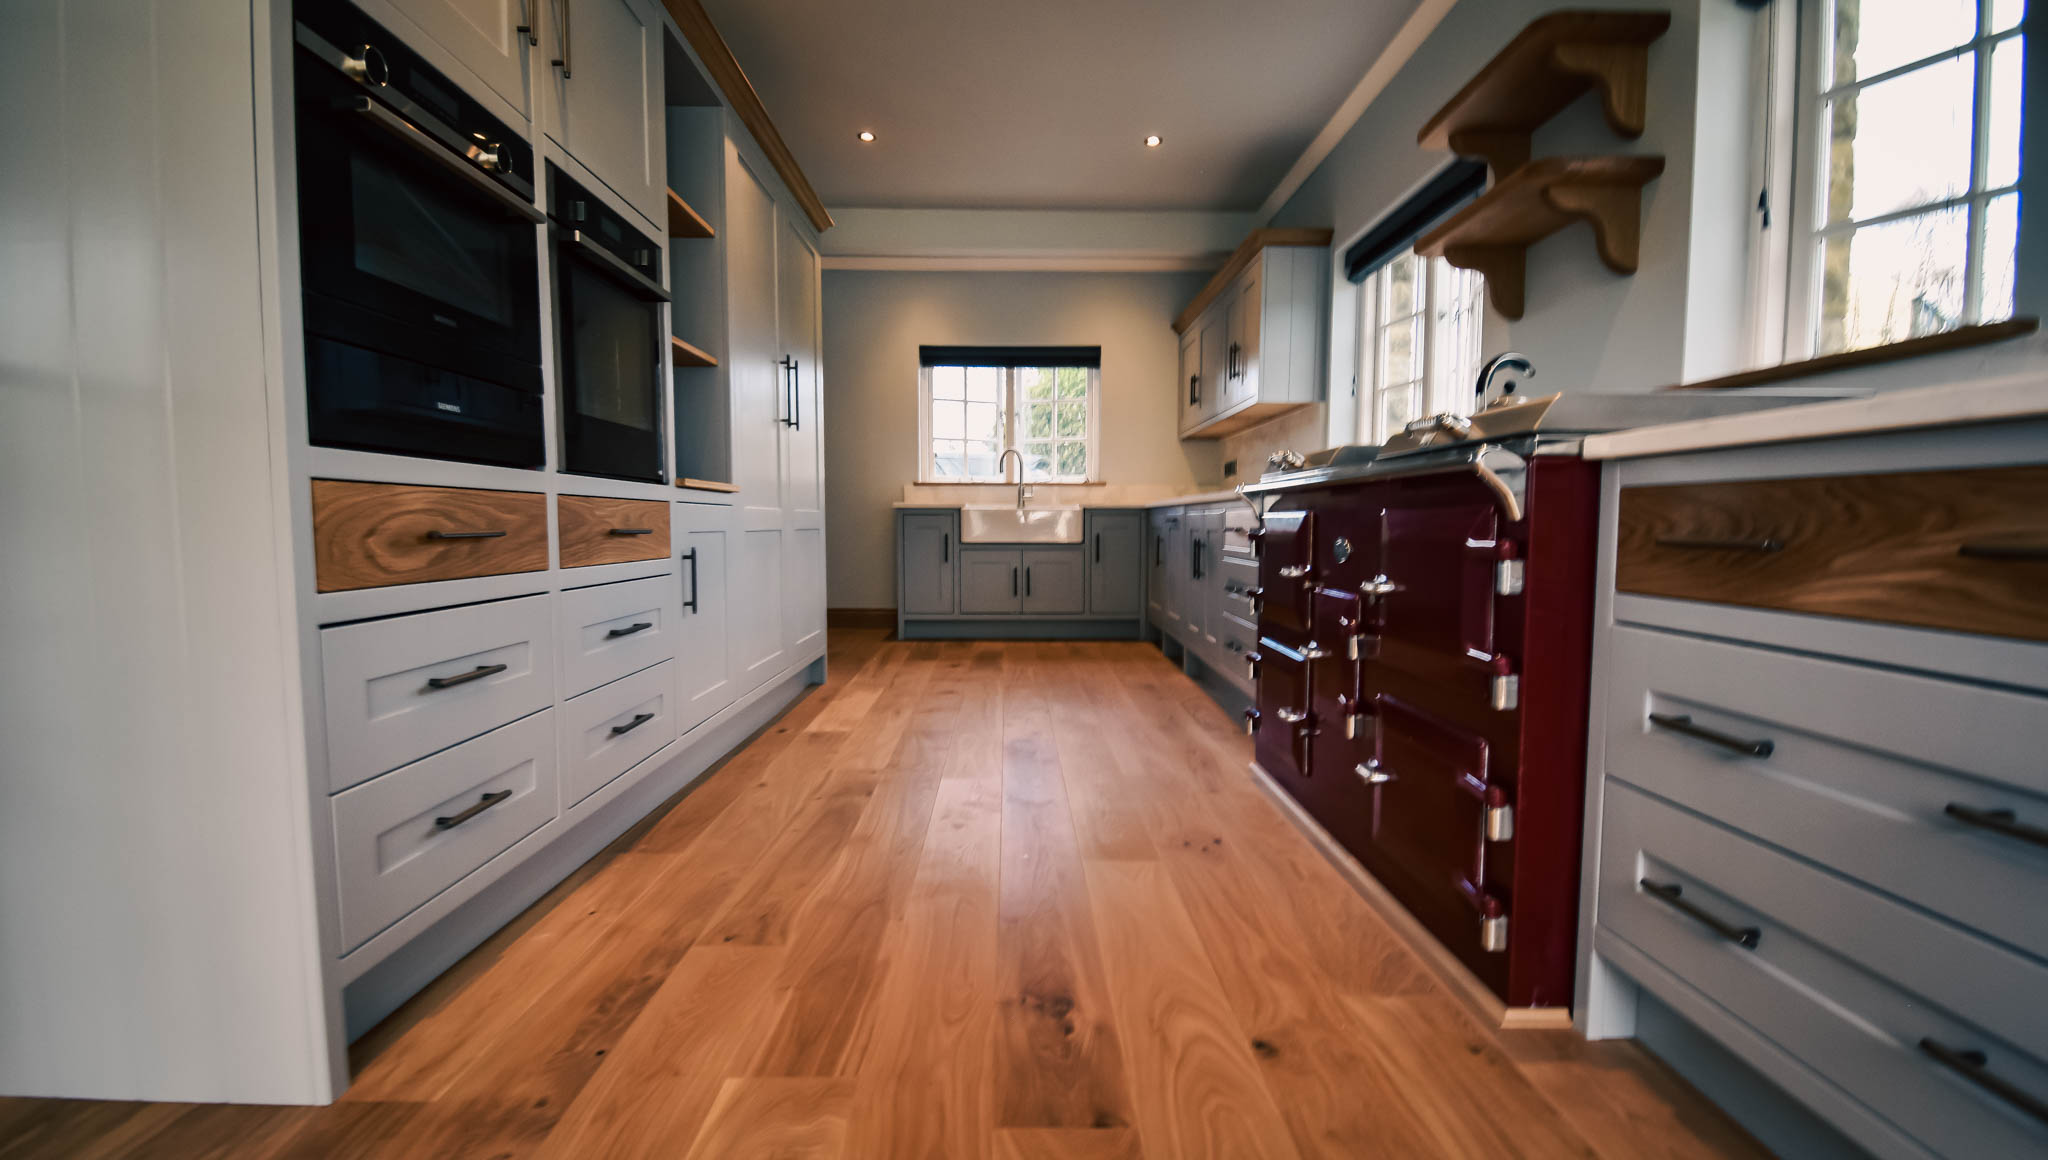 Made to measure joinery Skipton. Handmade kitchens with bespoke design service. Property Renovations North Yorkshire. Bespoke joinery Skipton